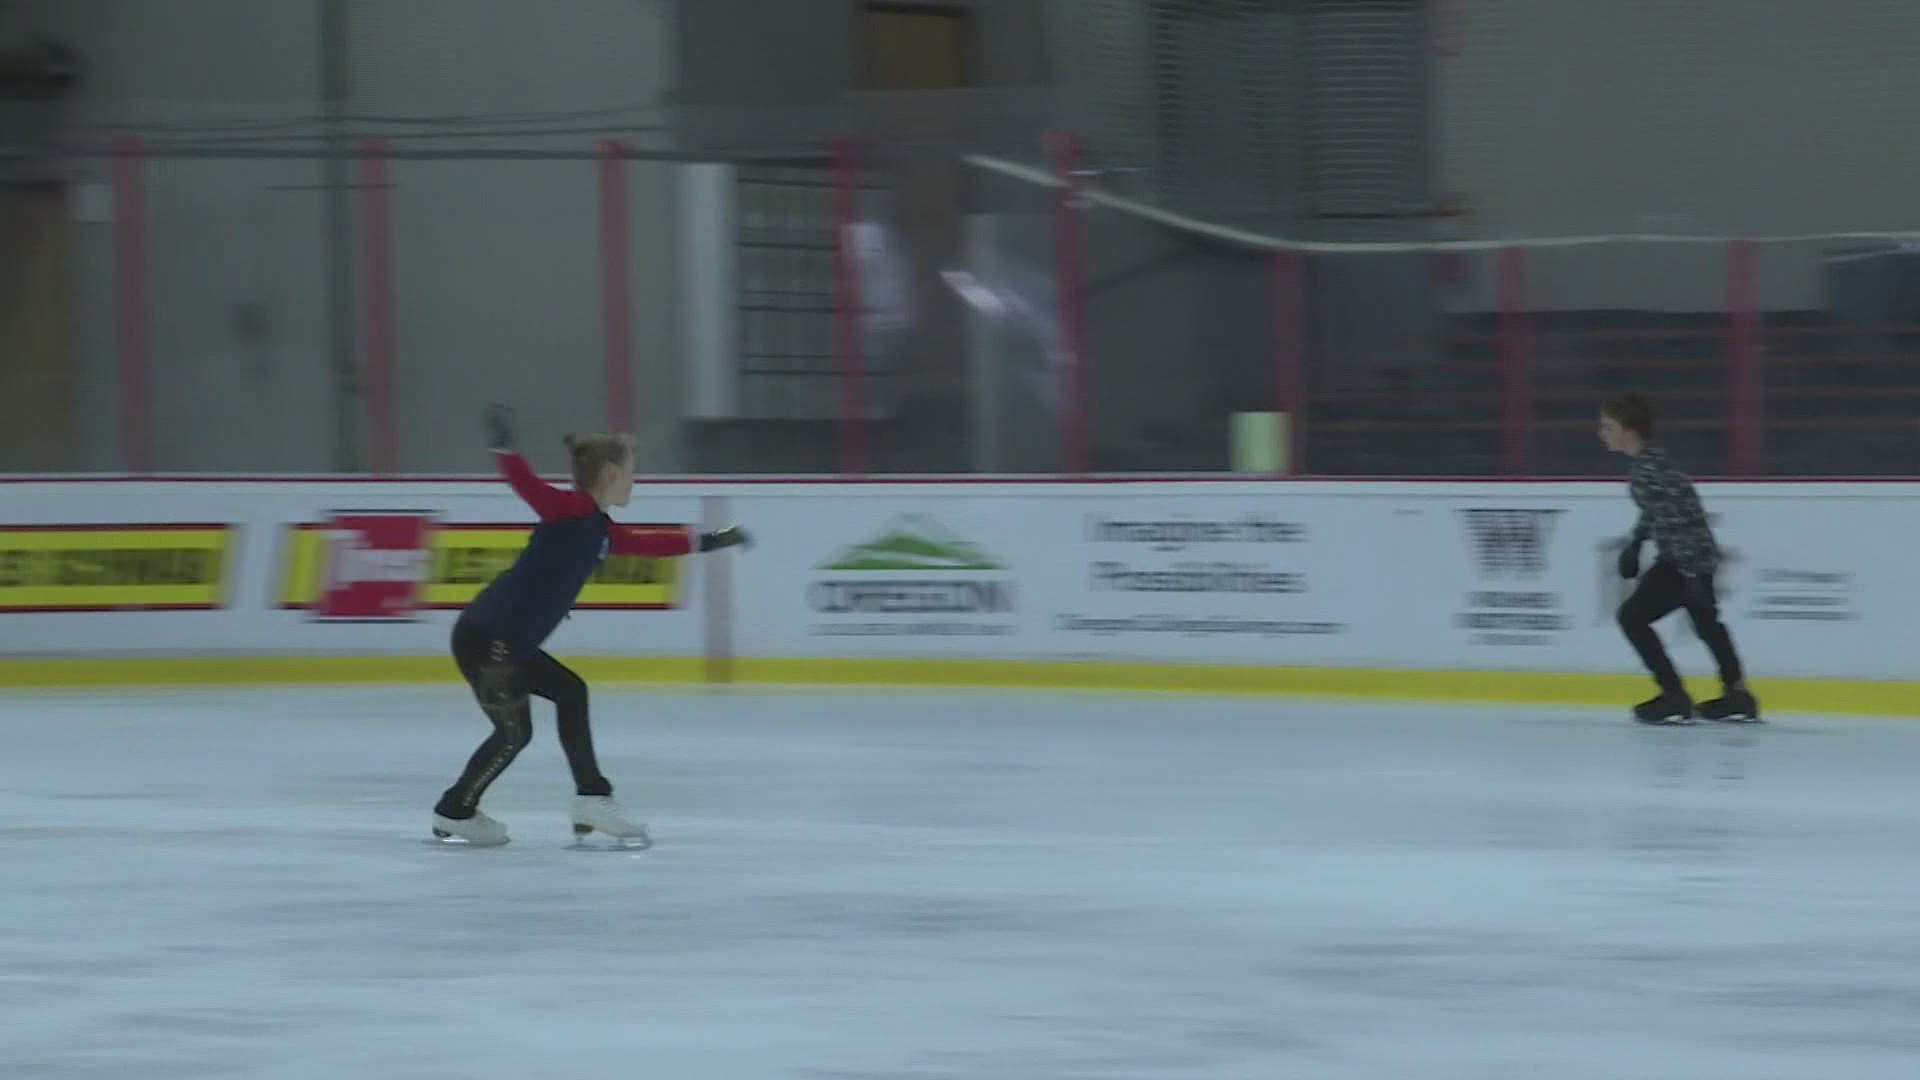 Some skaters from Sherwood qualified for a national competition.